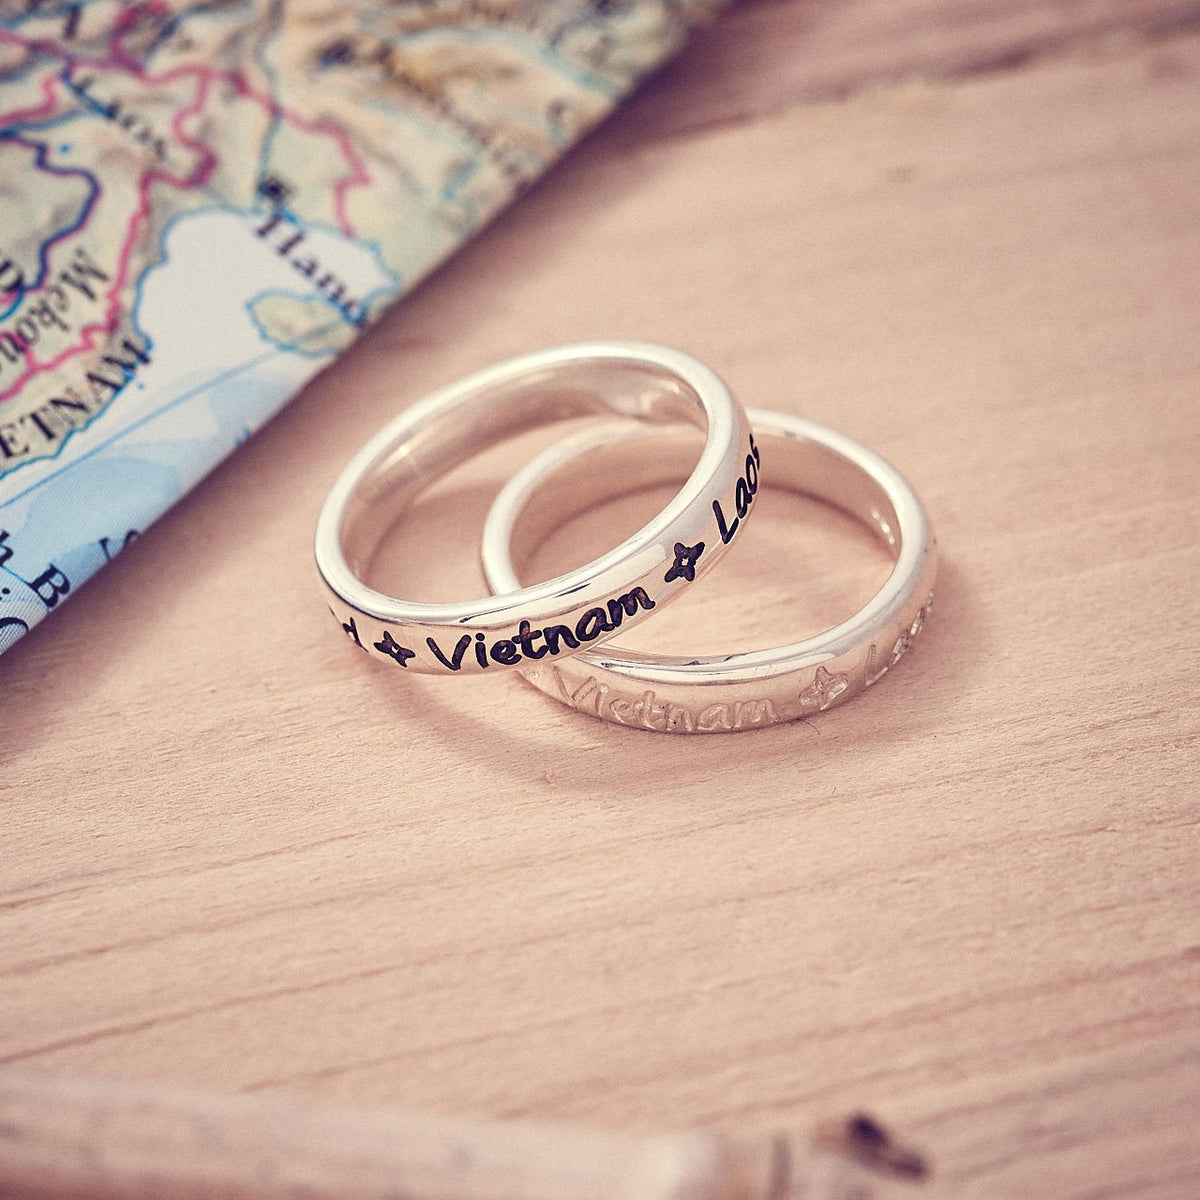 Round The World Personalised Travel Ring, unusual gift for a friend going traveling